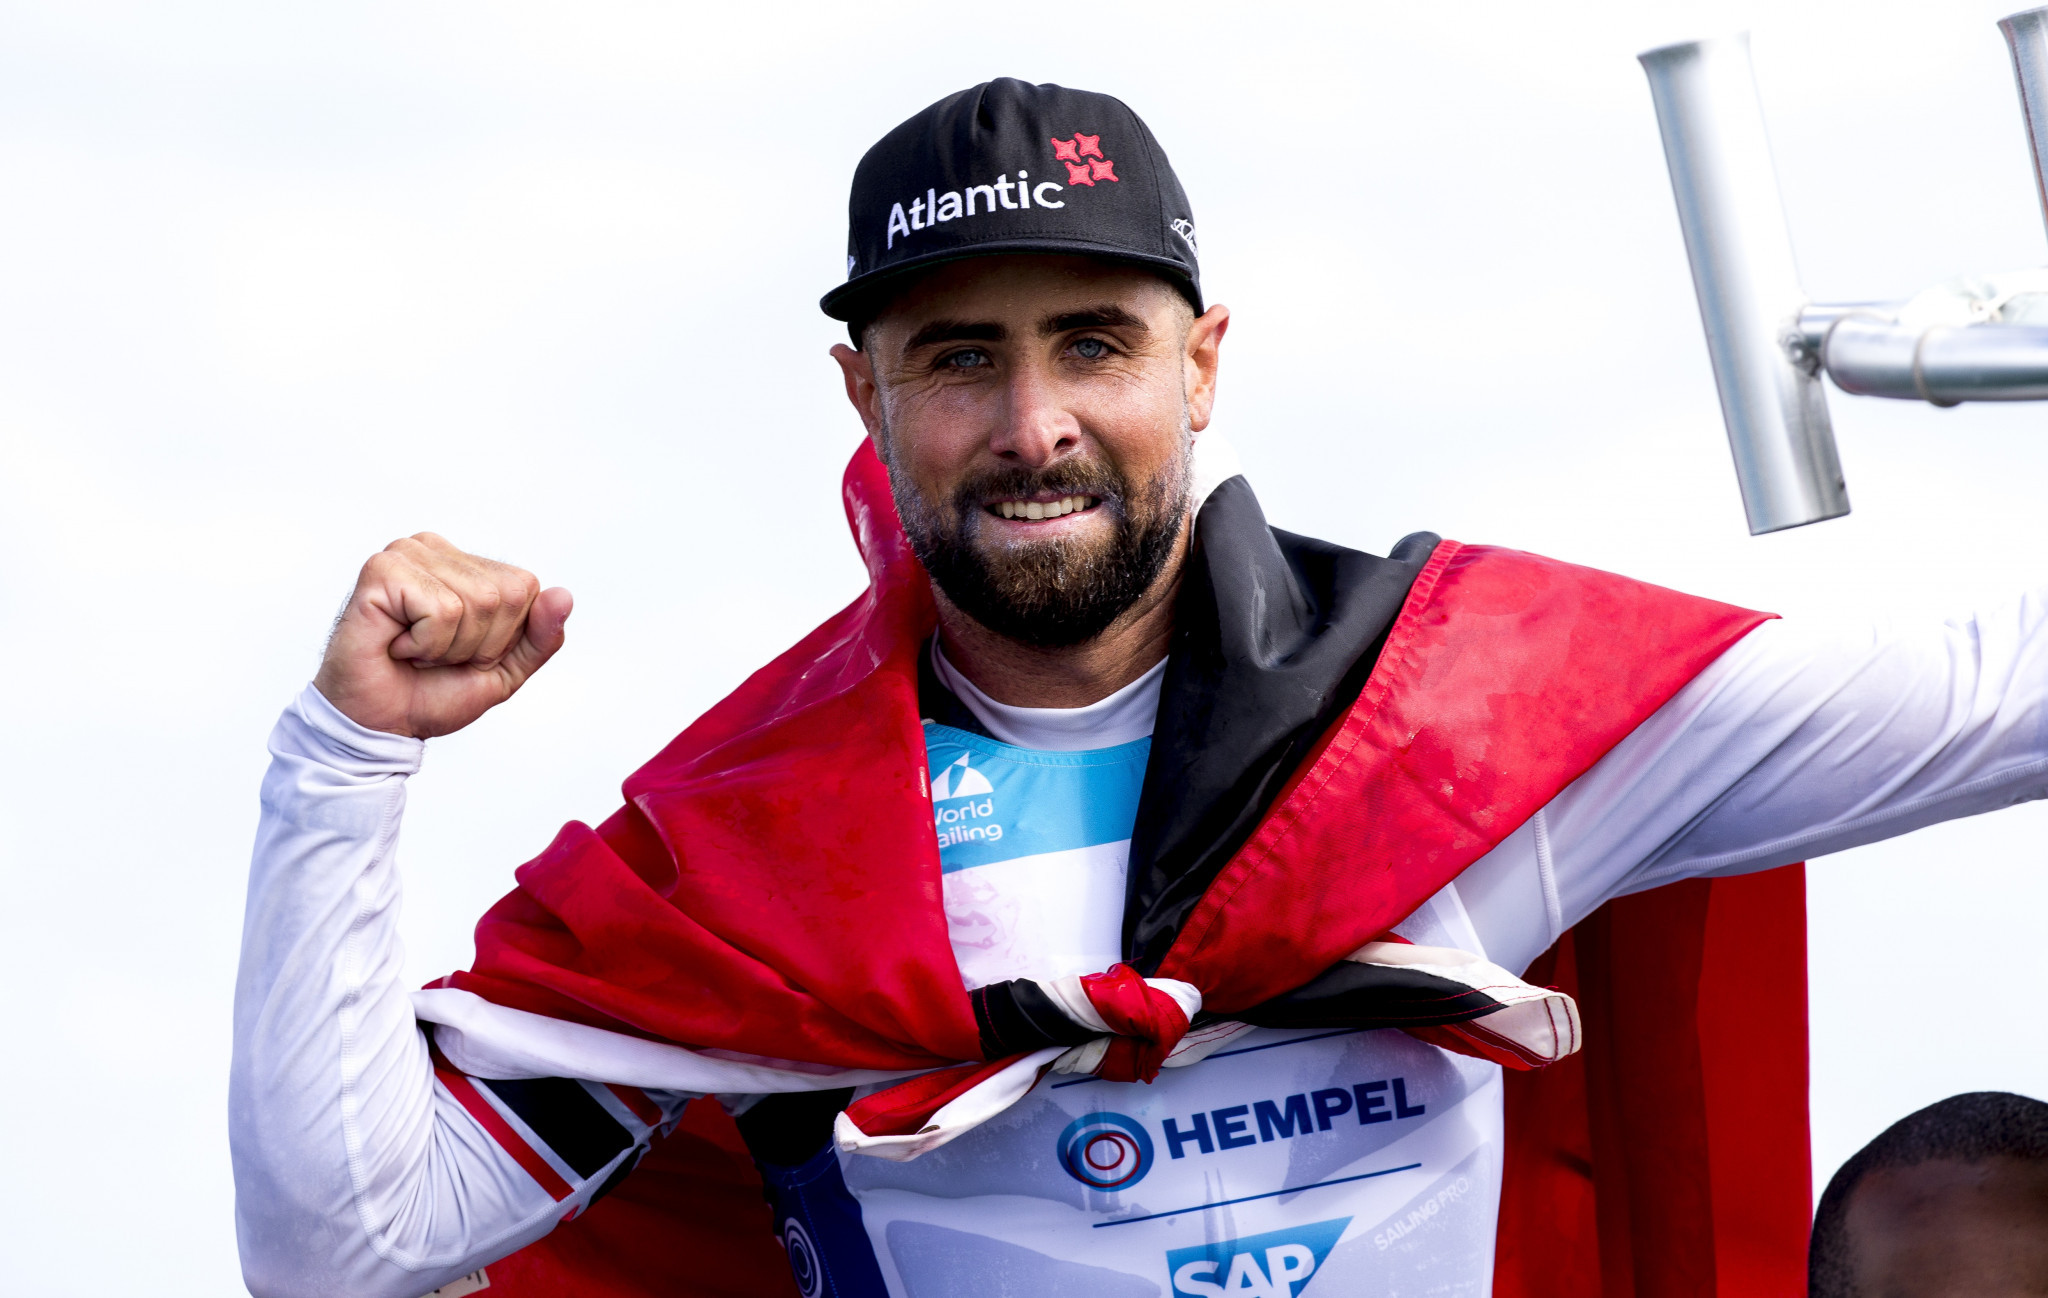 Trinidad and Tobago's Andrew Lewis booked his place at Tokyo 2020 in a dramatic medal race in Miami ©World Sailing